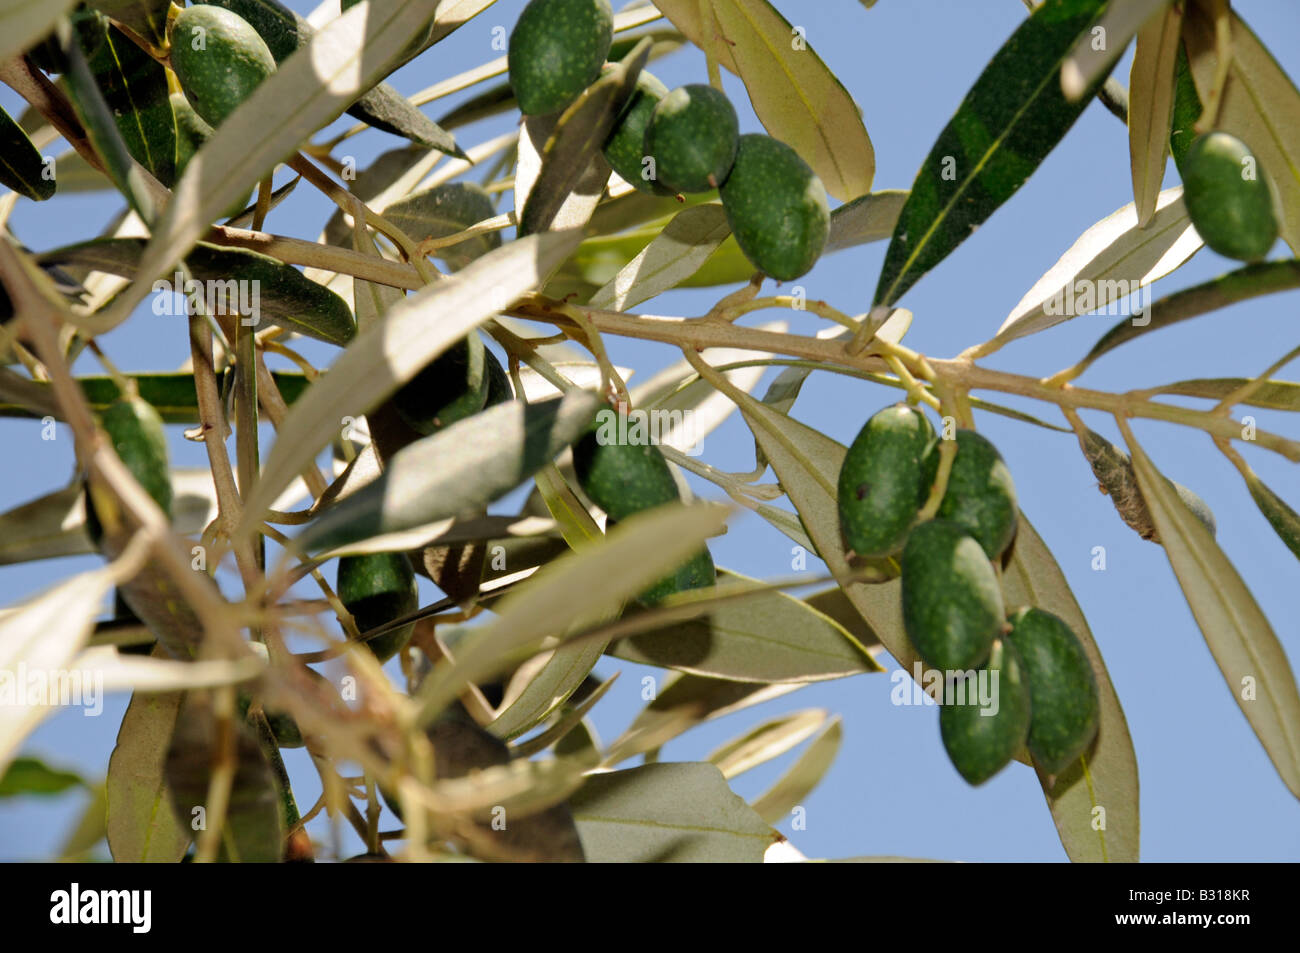 OLIVE TREE WITH OLIVES Stock Photo